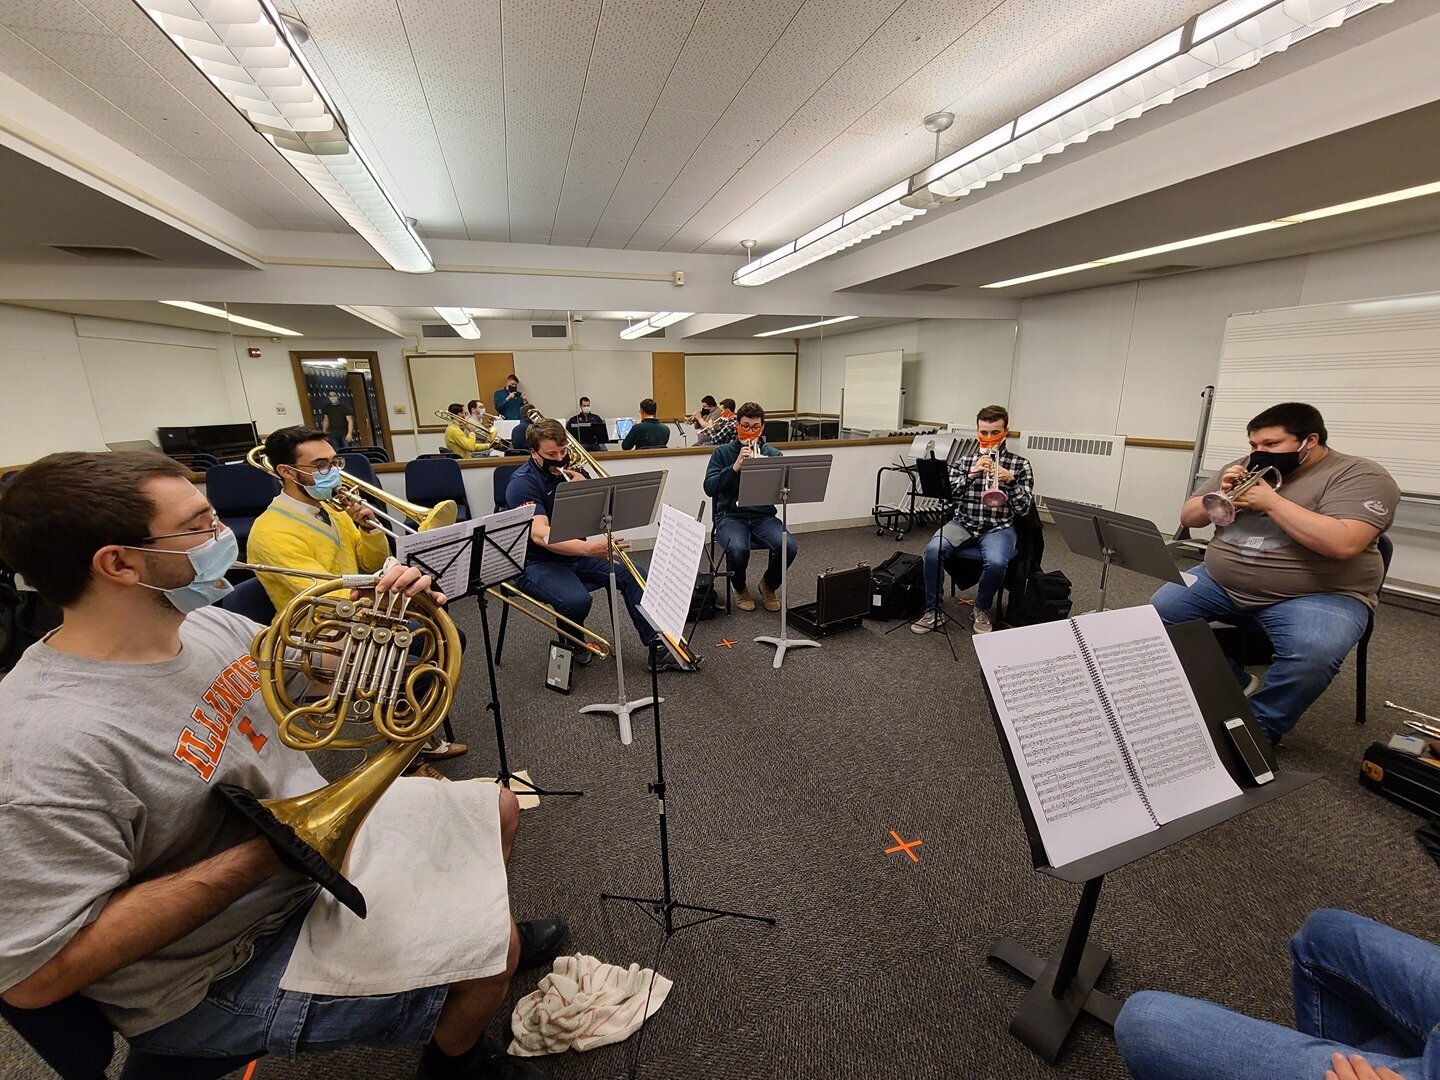 The Illinois Wind Symphony has been hard at work on several chamber works. Members of the brass section can be seen here preparing the &quot;Brass Sextet in E-flat Minor&quot; by Oskar B&ouml;hme with coaching help by graduate student Tim Loman. 

Un